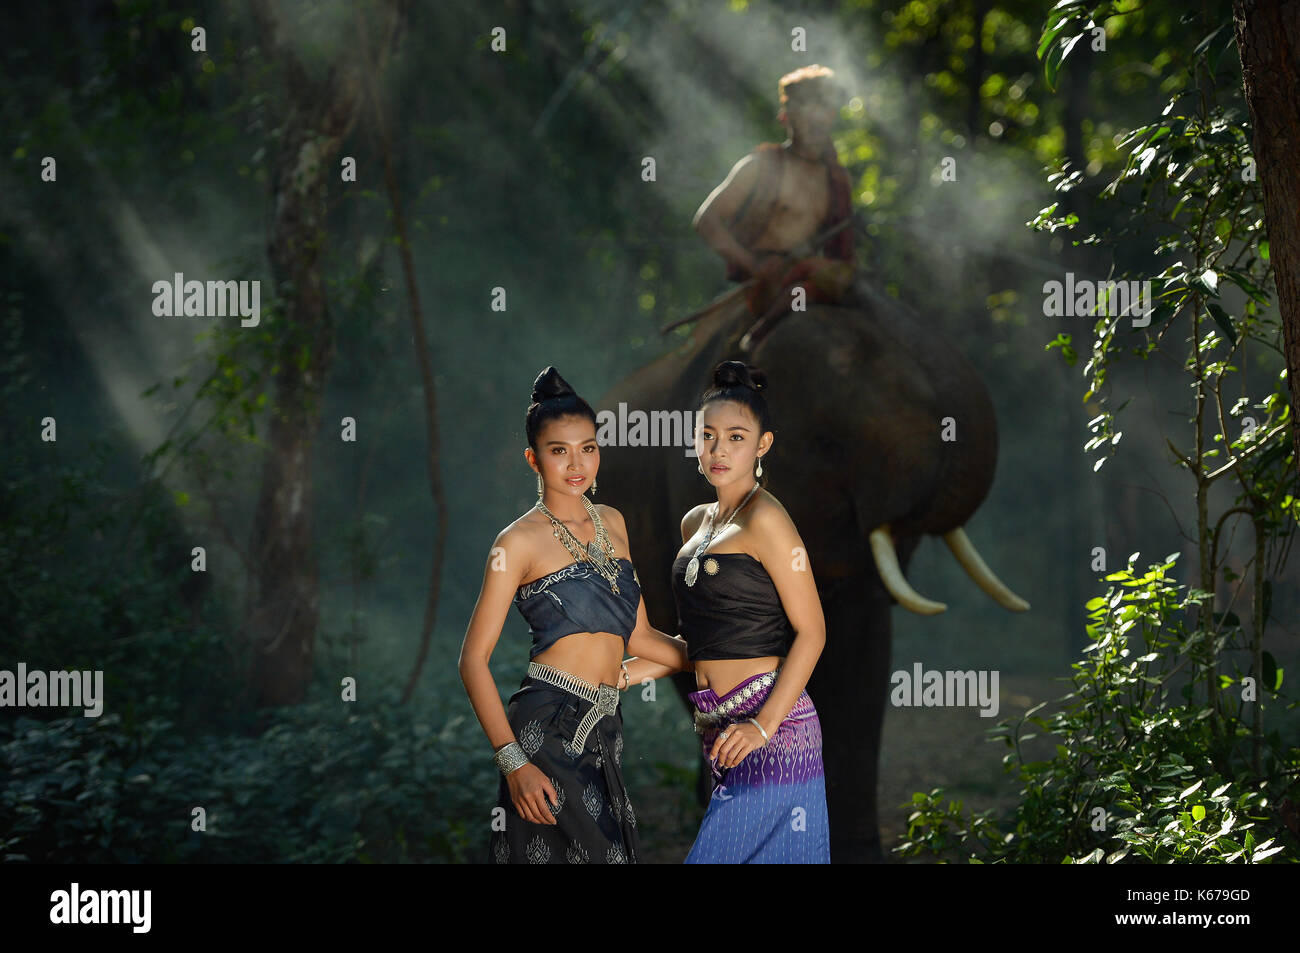 Two women in traditional Thai clothing with a mahout riding an elephant, Thailand Stock Photo